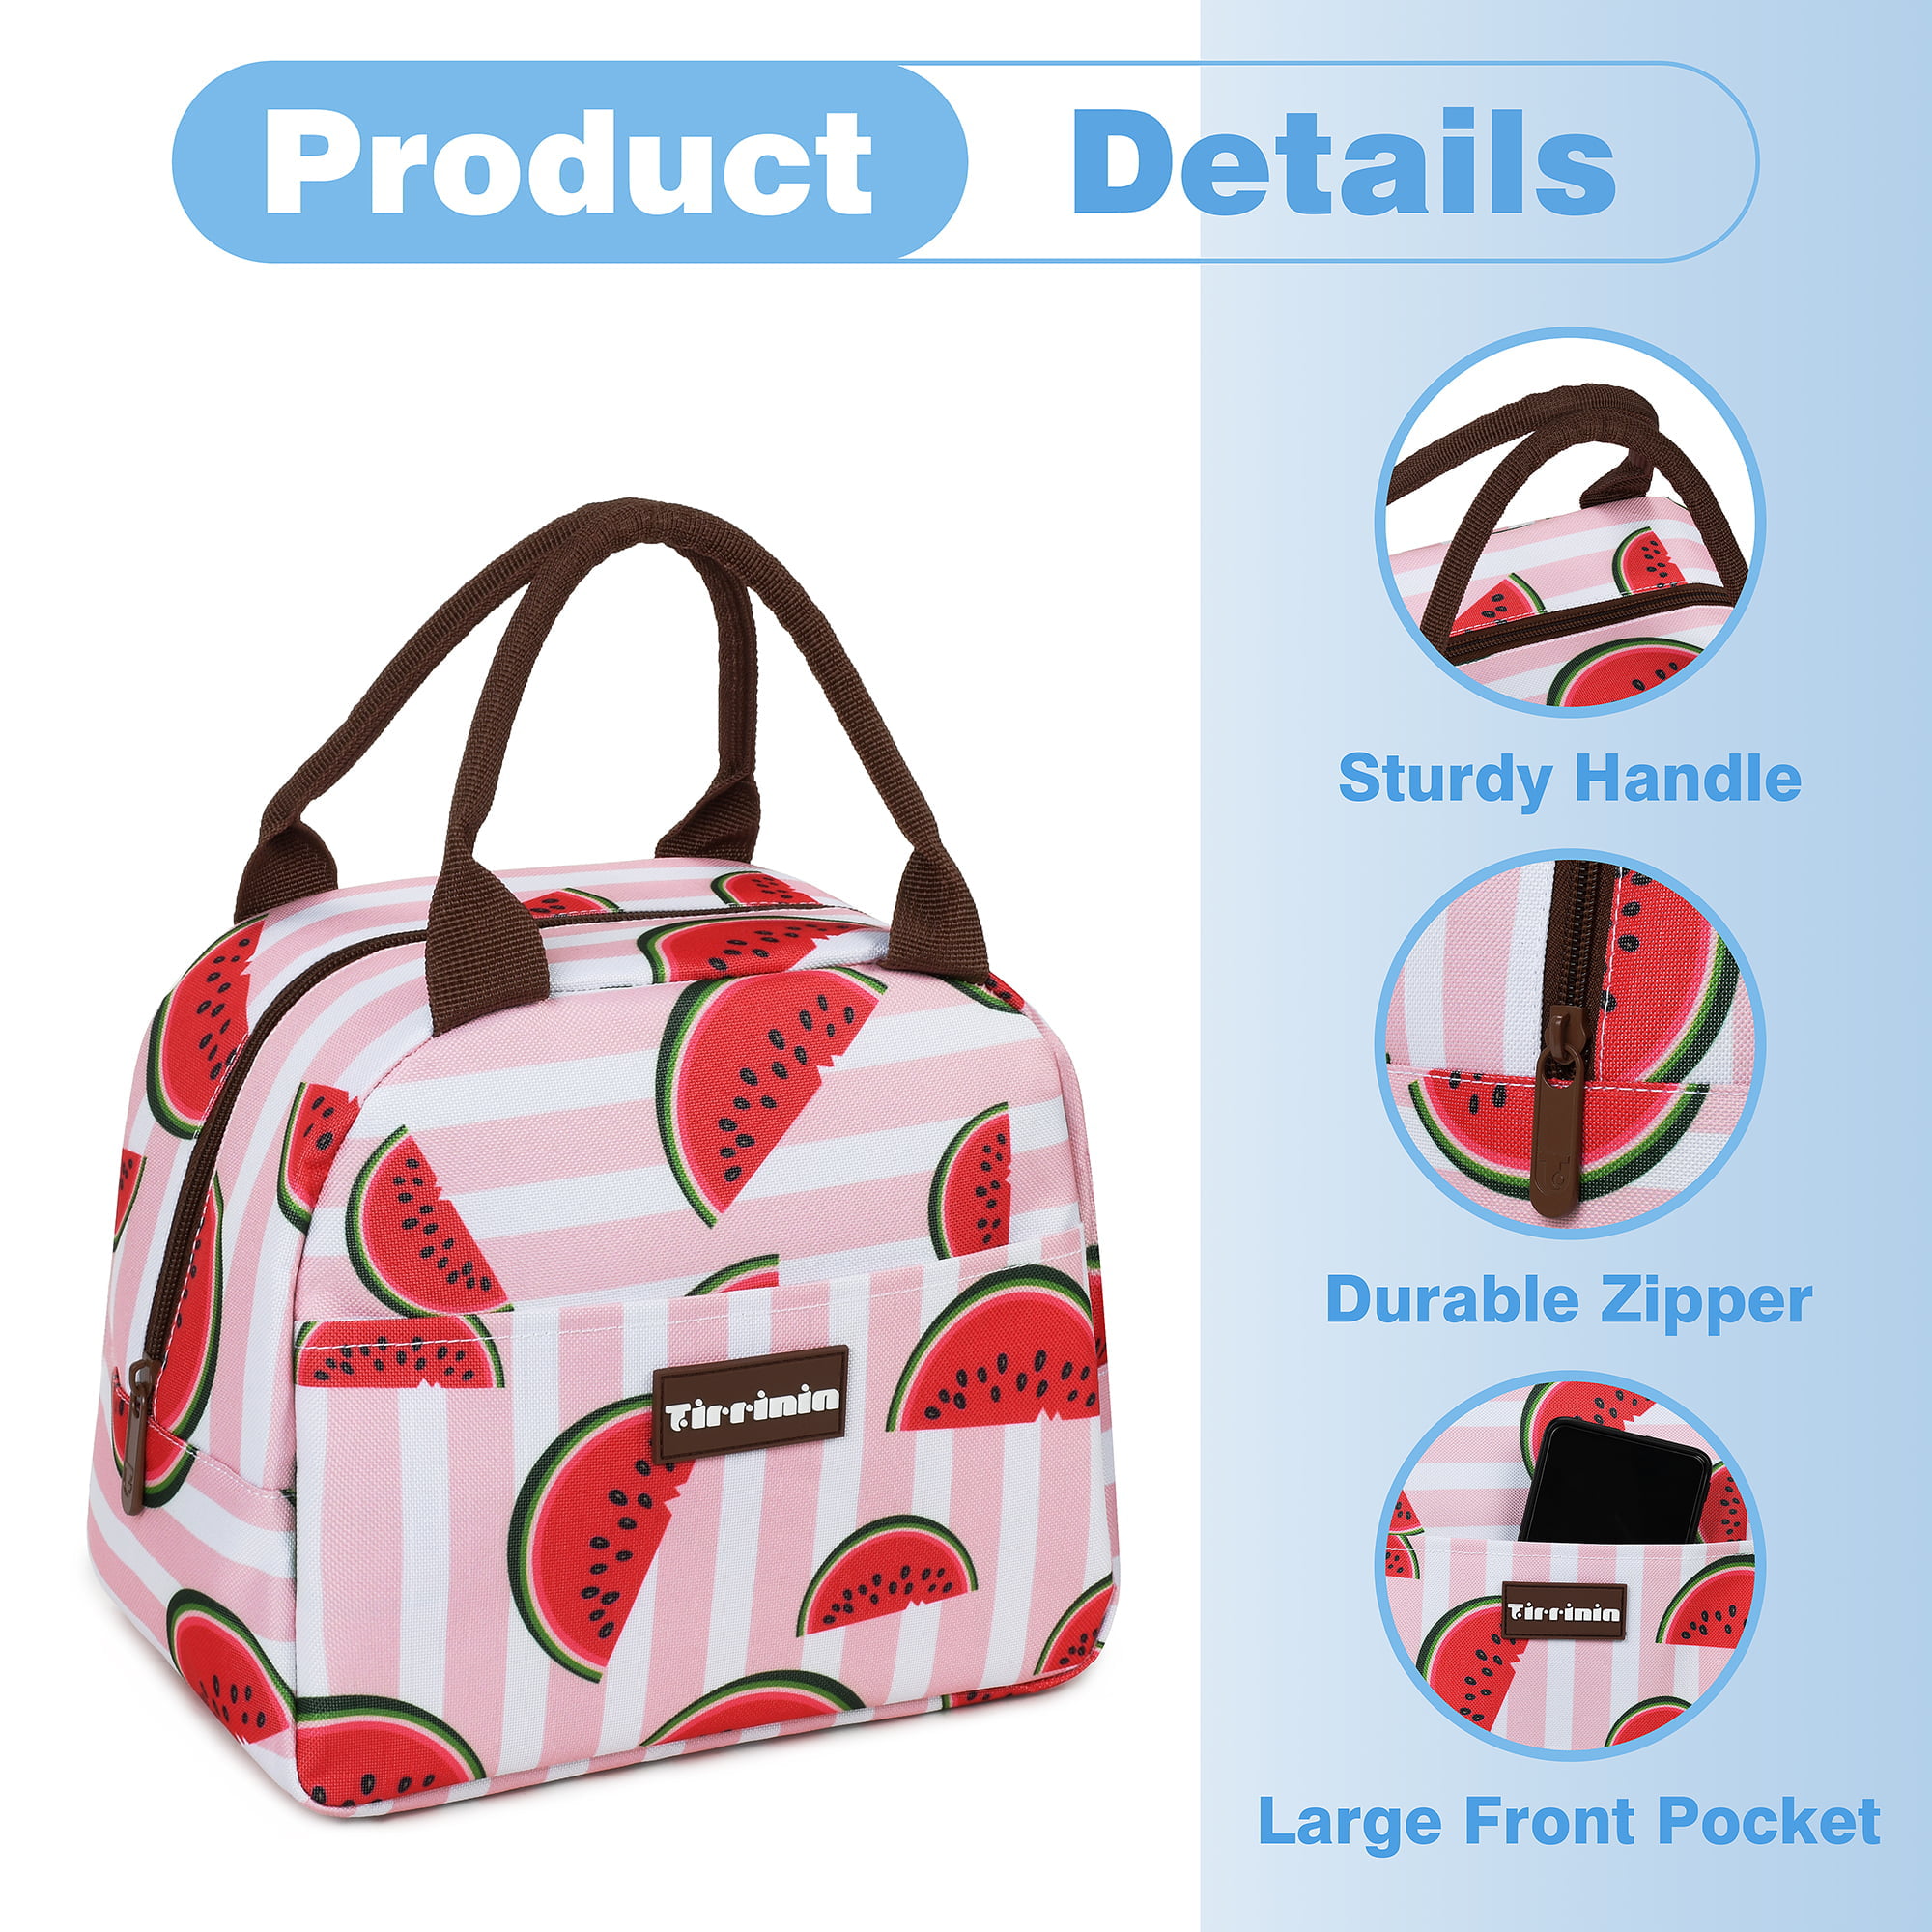 HOMESPON Lunch Bags for Women Insulated Cute Lunch Box loncheras